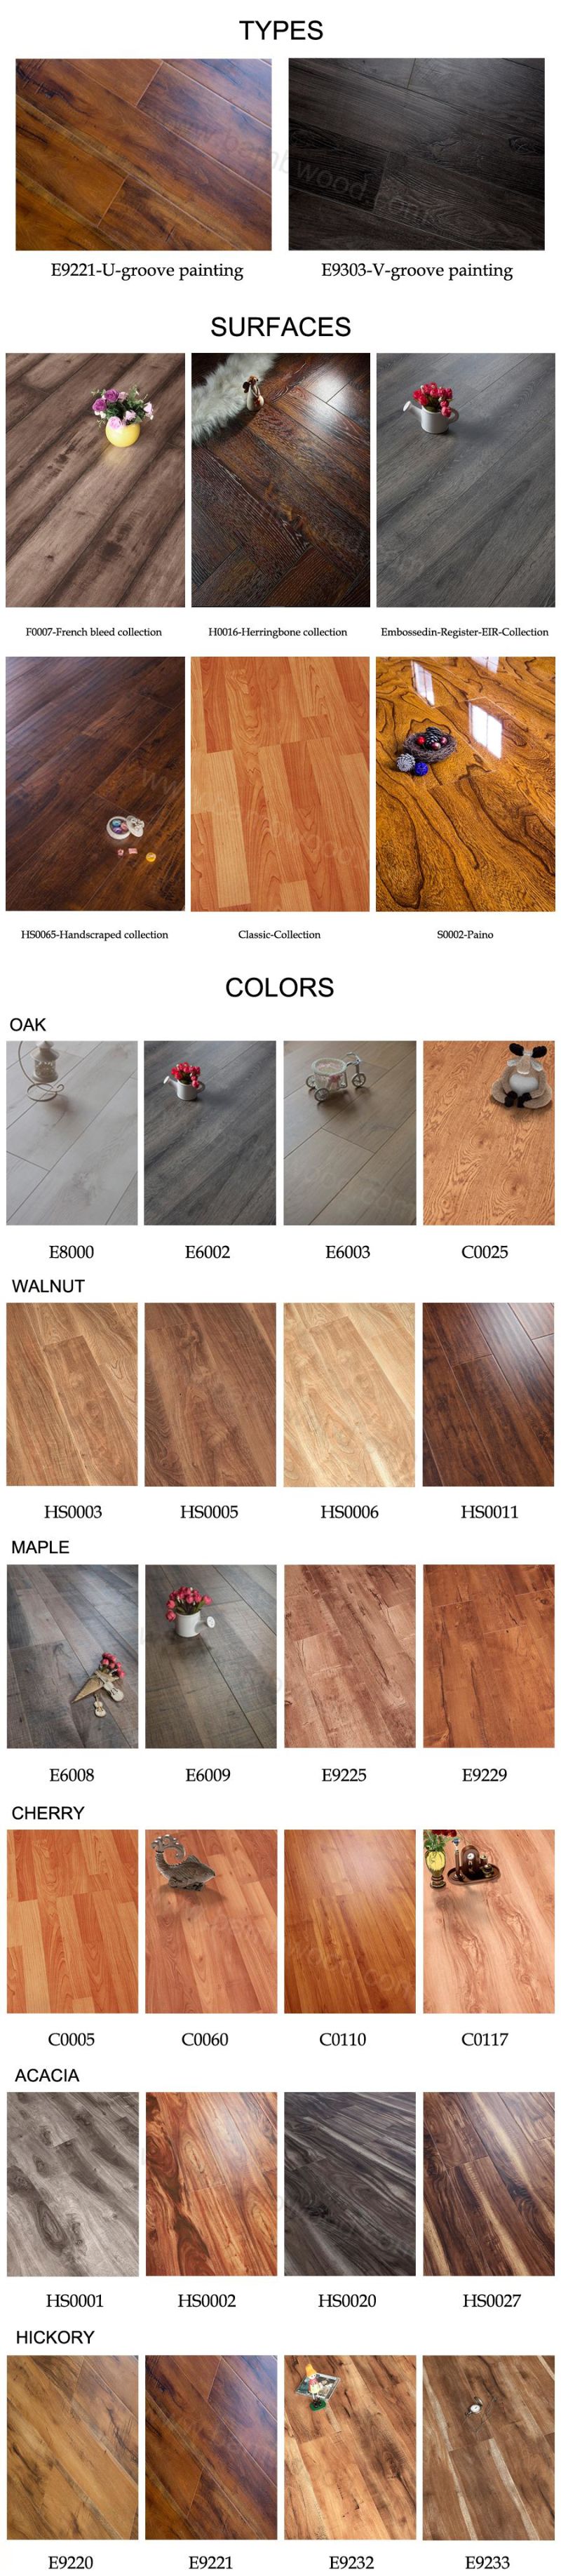 Eco-Friendly Commercial 12mm Laminate Flooring From China Commercial Waterproof Flooring